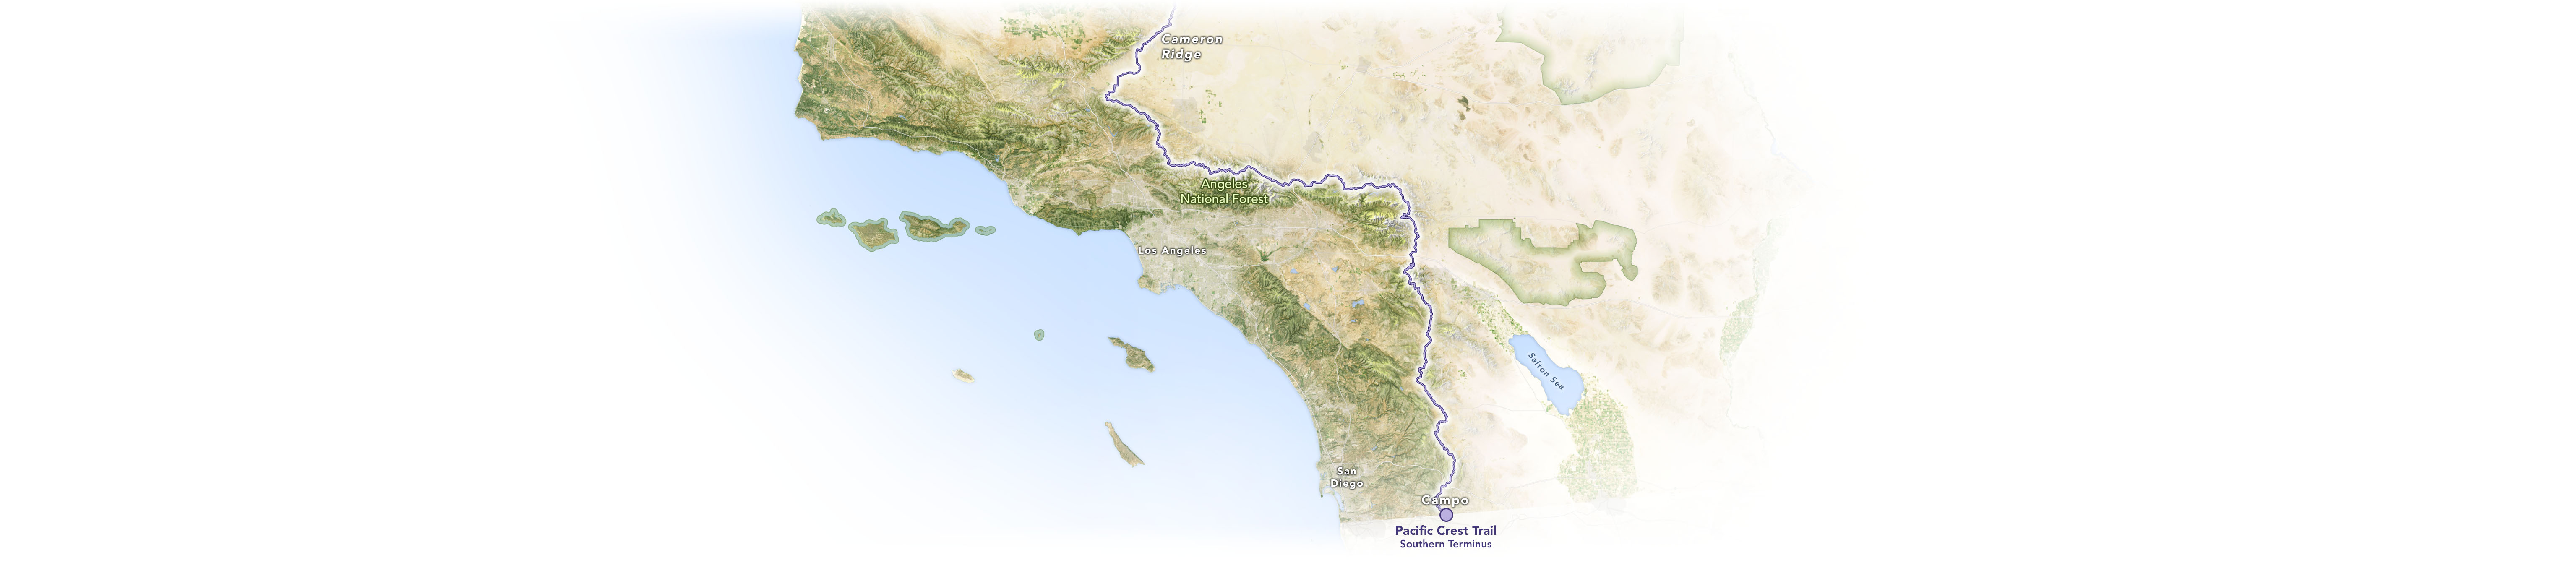 A map of the Pacific Crest Trail and nearby landmarks in southern California.